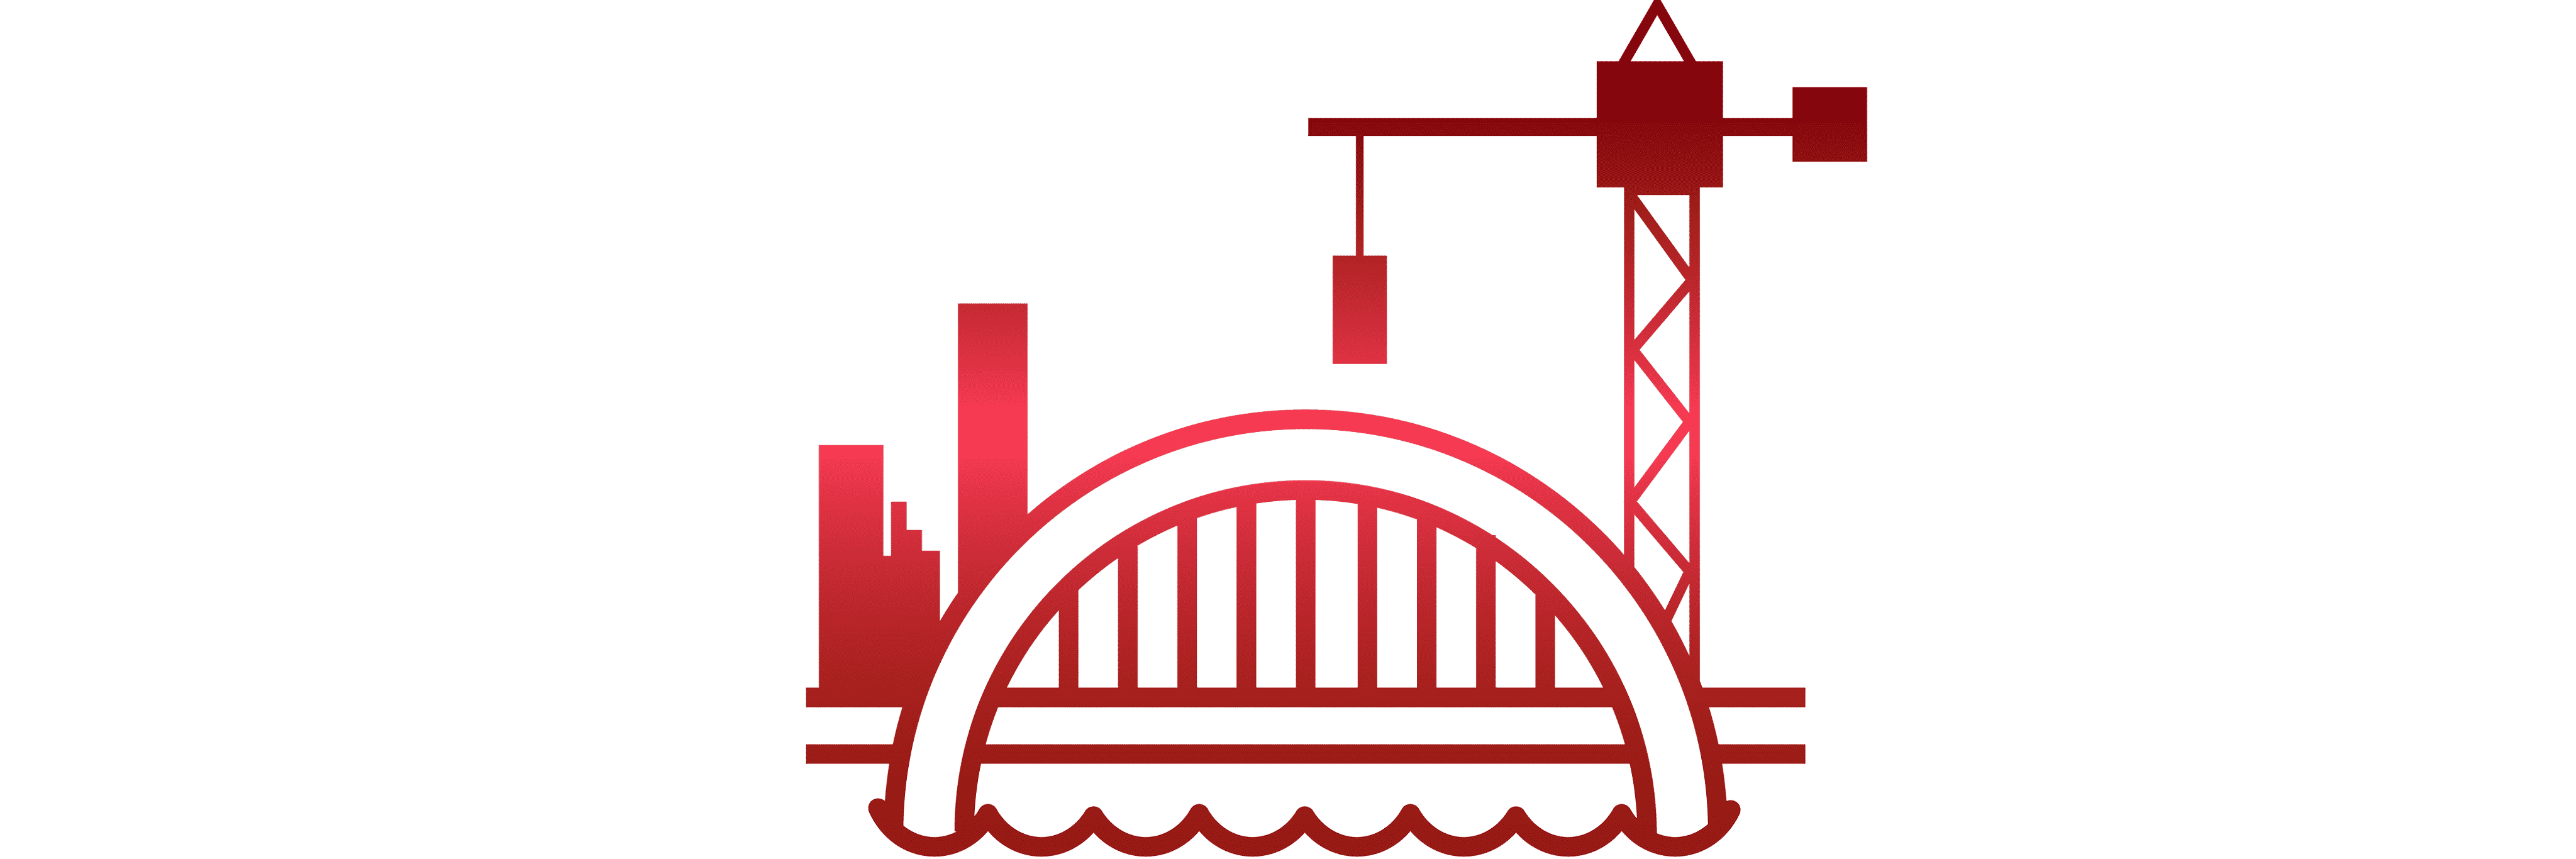 engineering clipart structural engineer